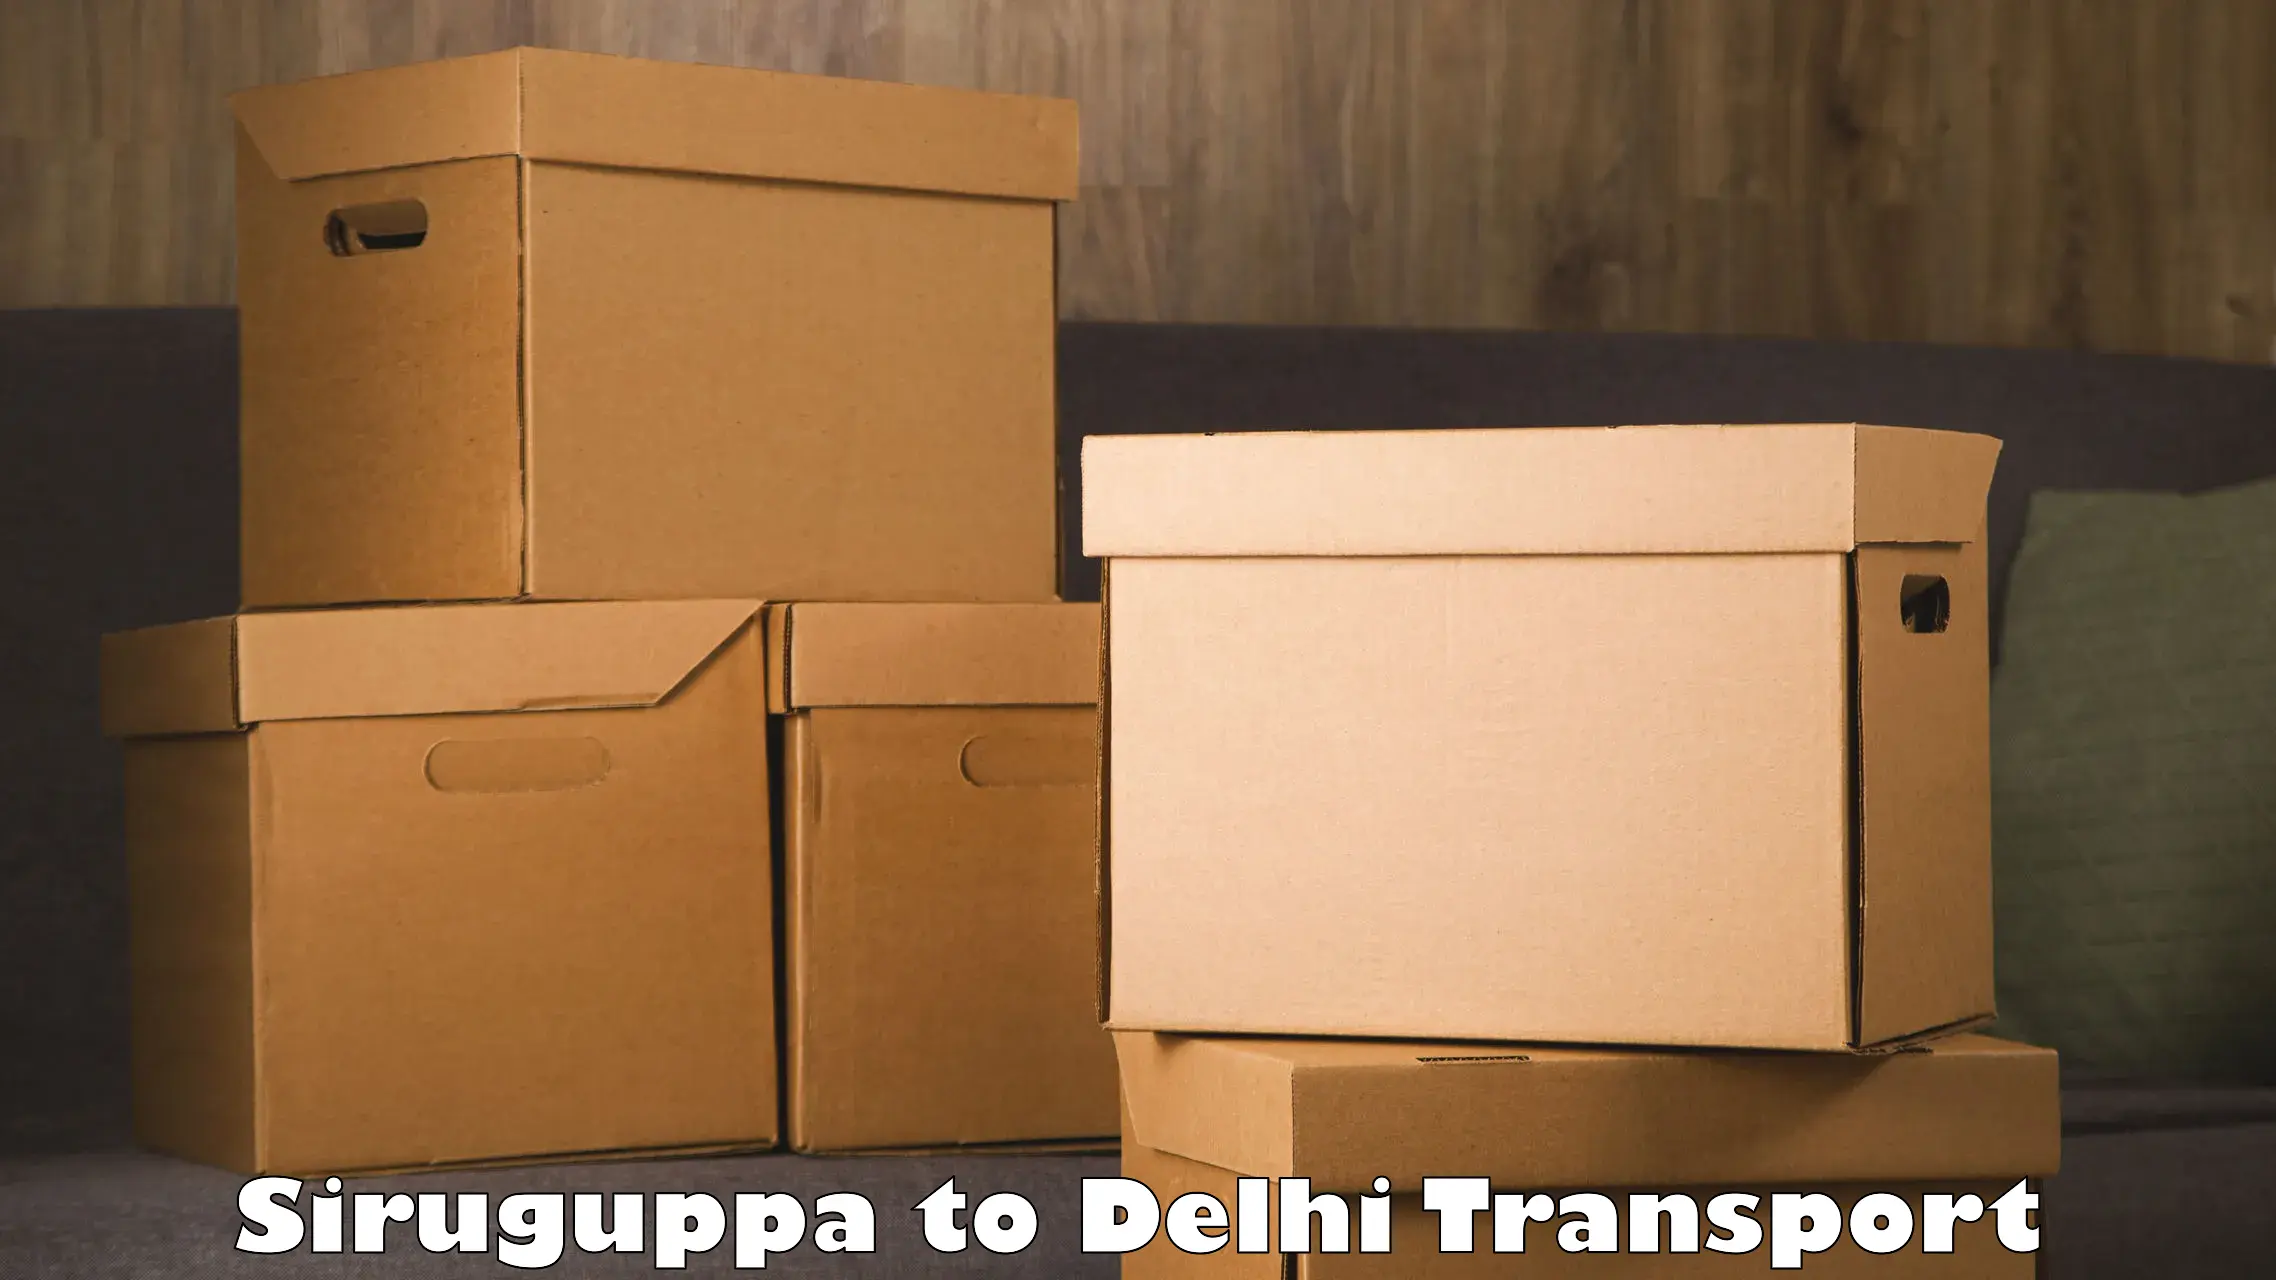 Two wheeler parcel service Siruguppa to NCR